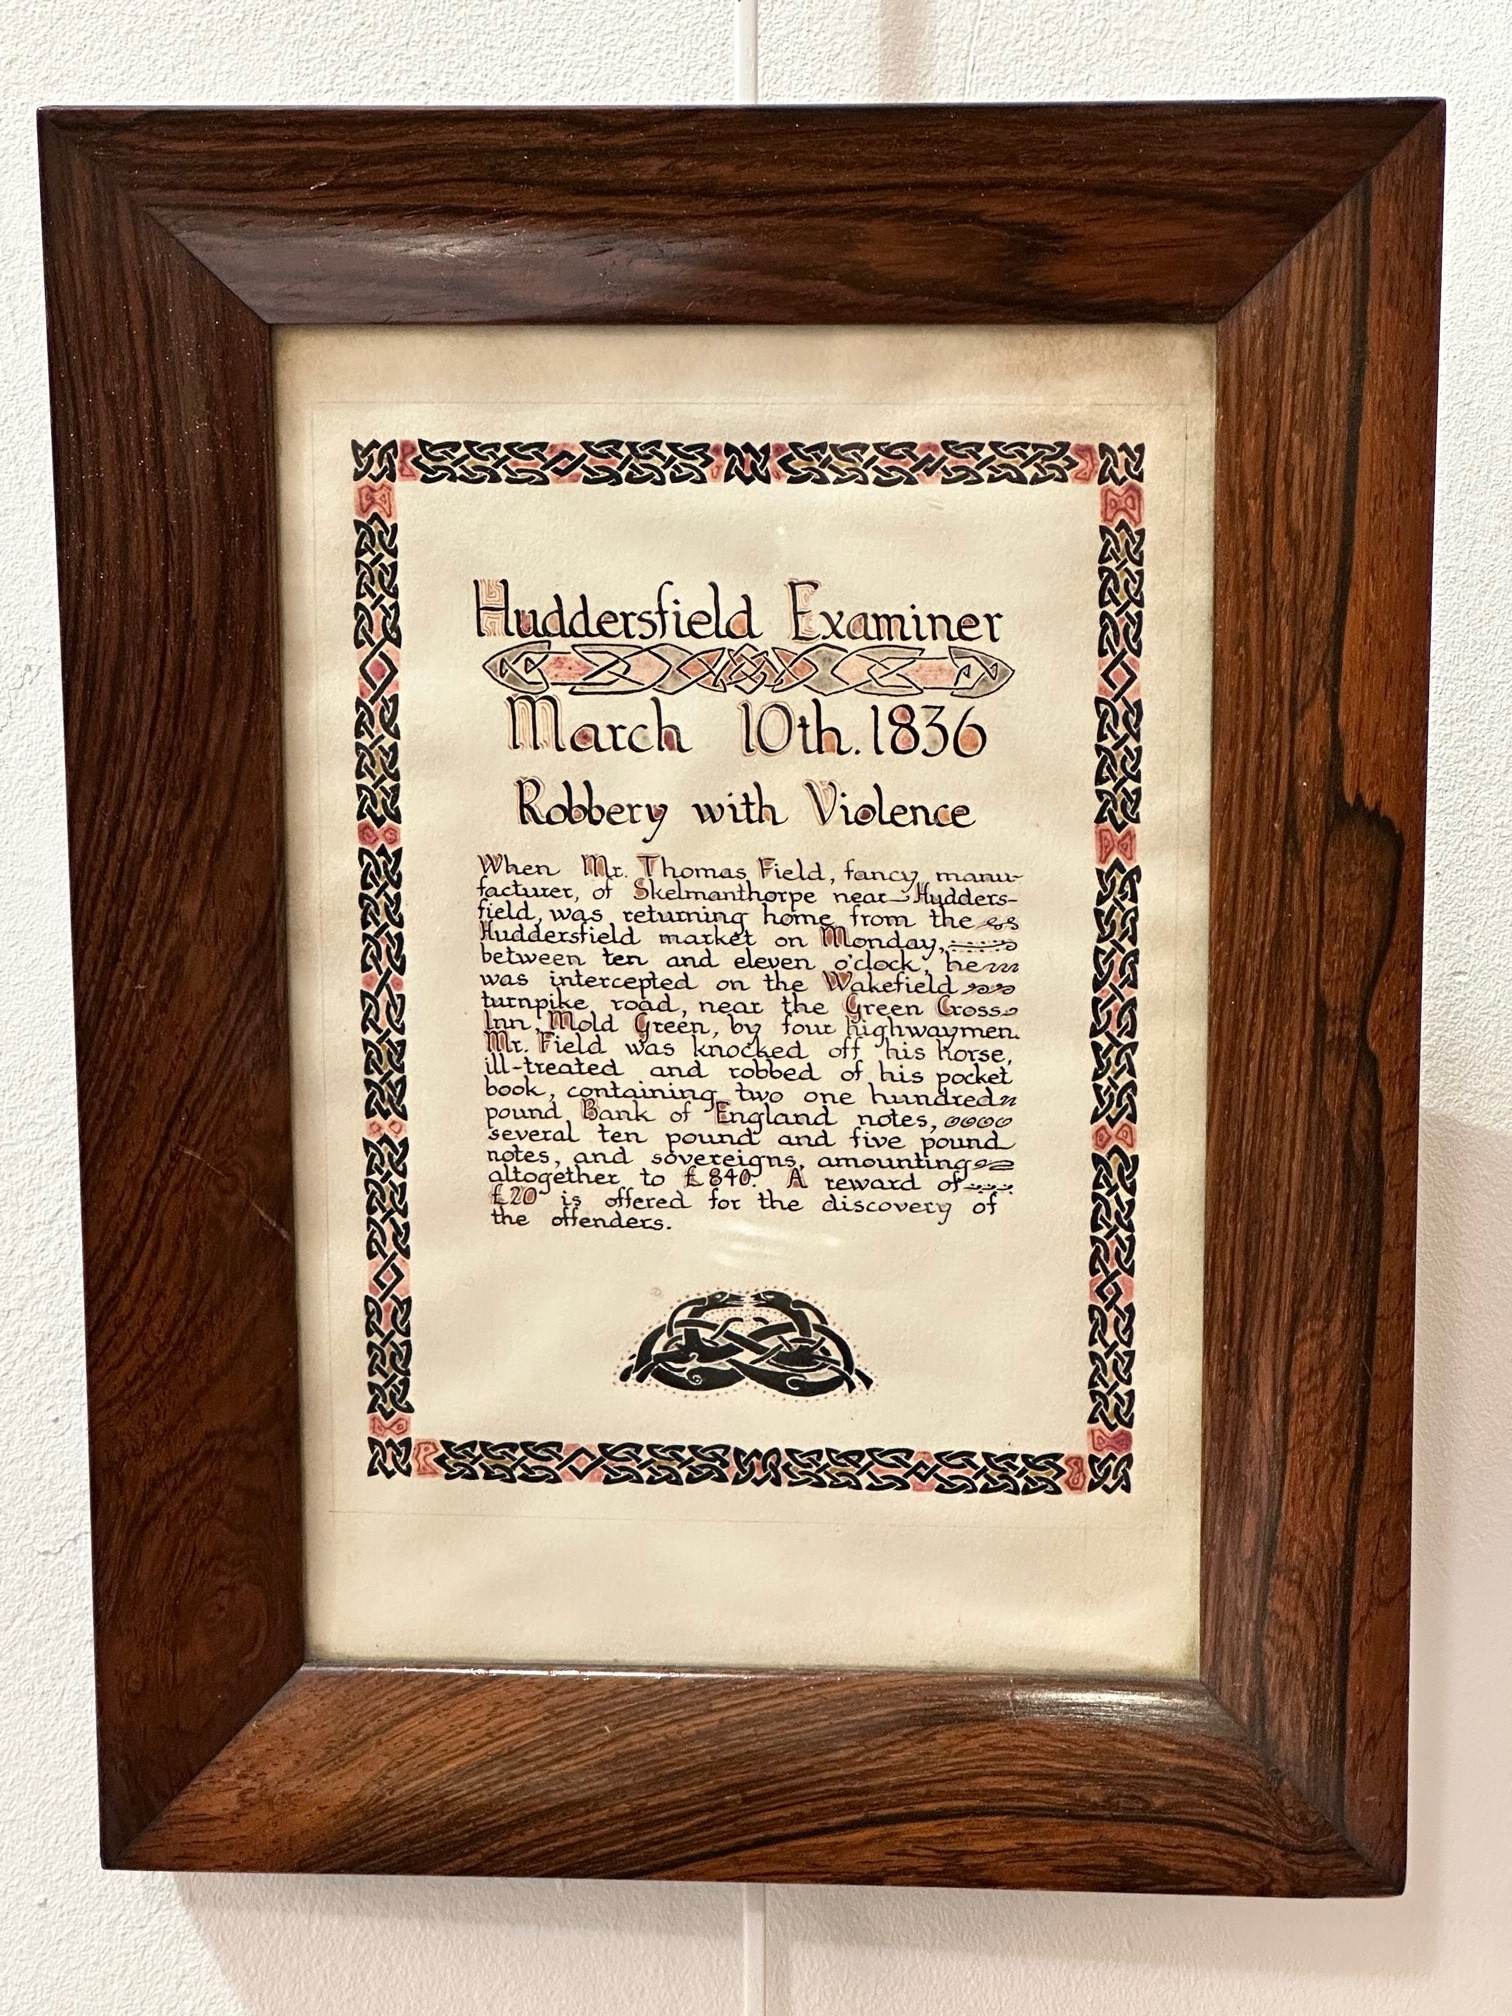 A 19th century rosewood frame containing an illuminated panel "Huddersfield examiner March 10th 1836